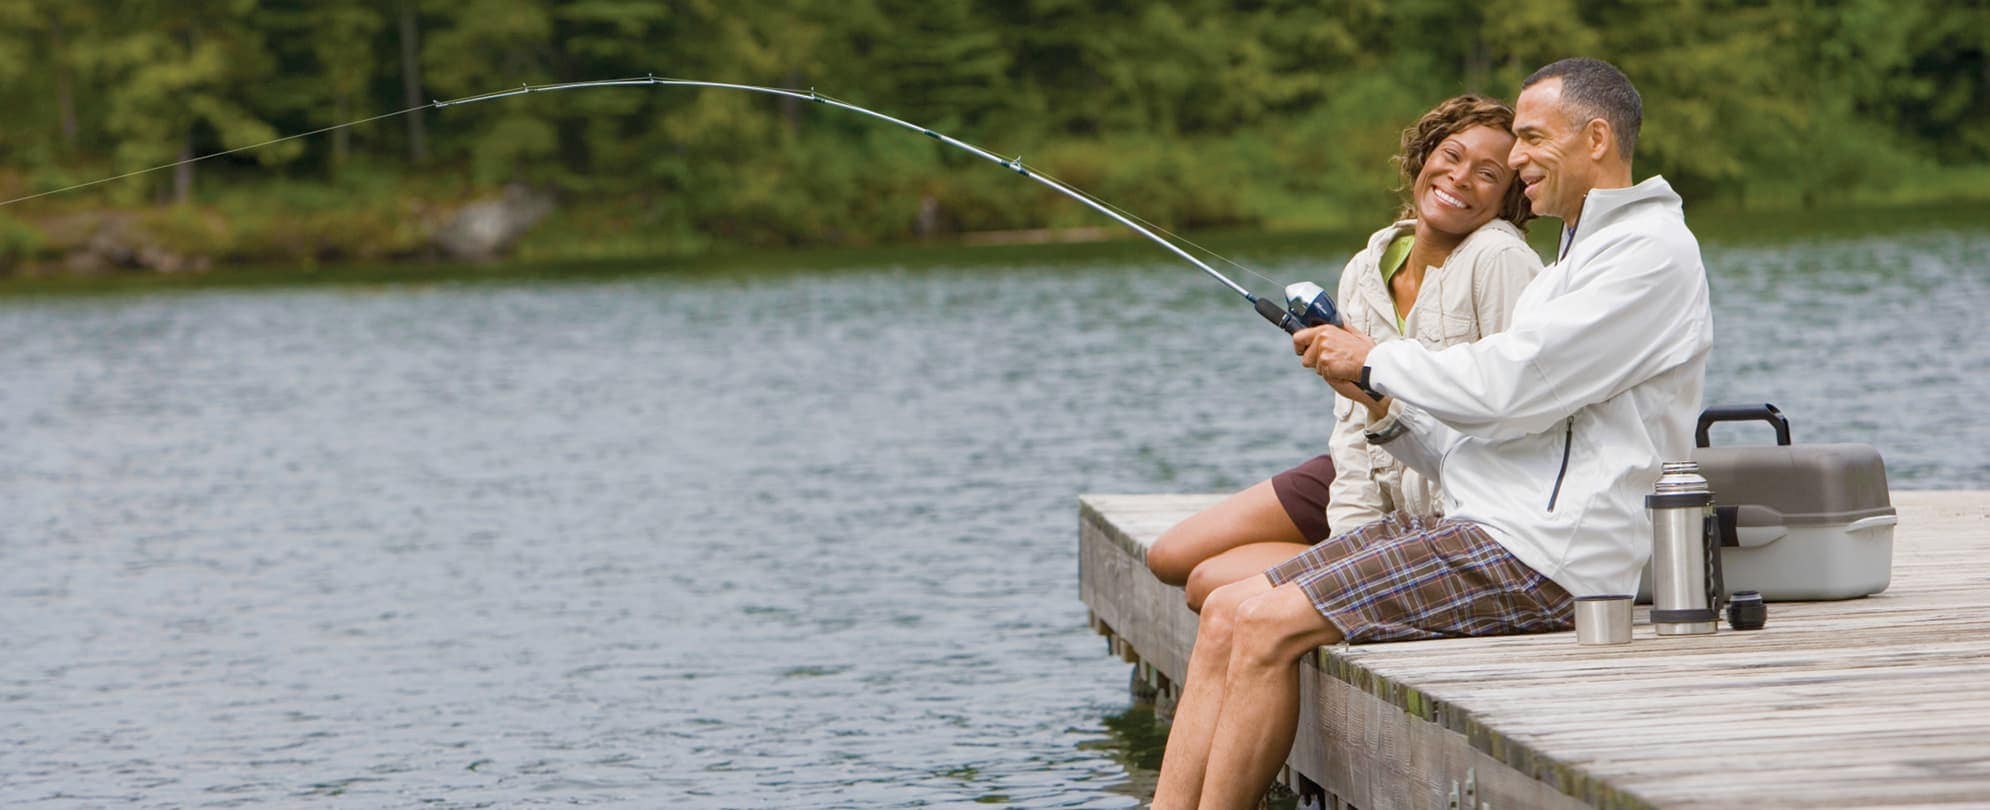 A man and woman sit smiling on a dock, casting a fishing line into Table Rock Lake.